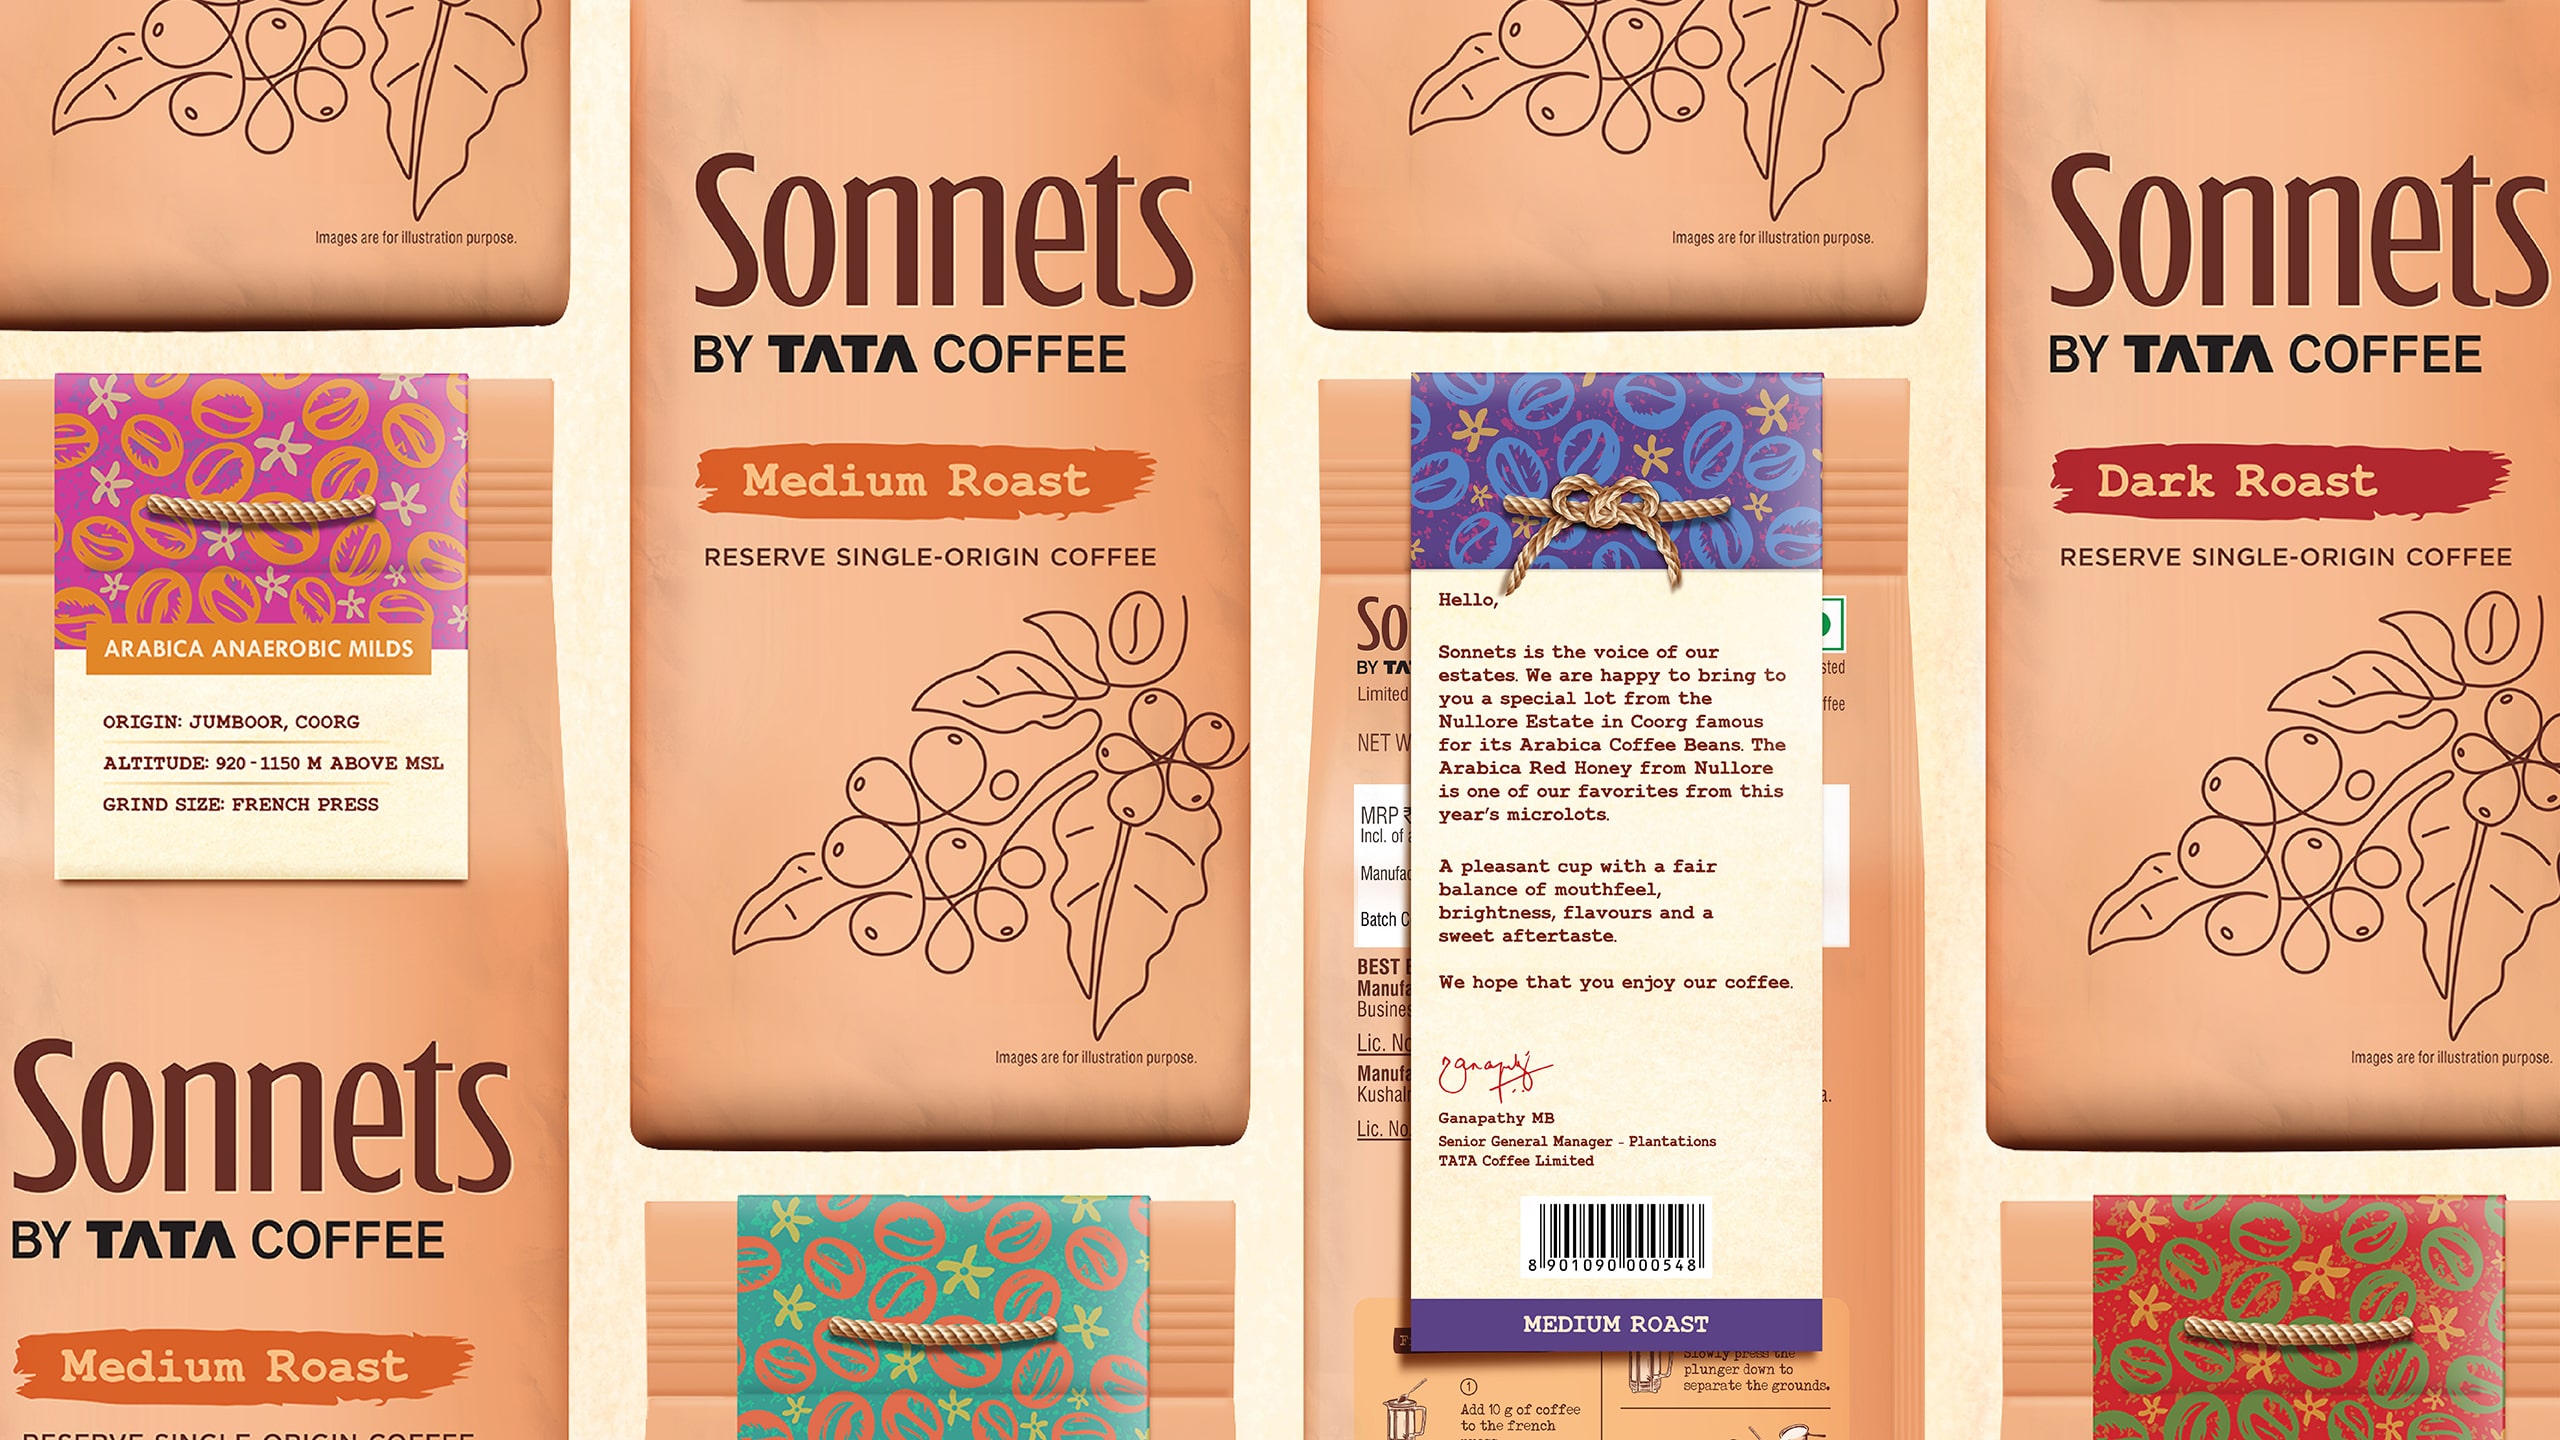 Sonnets by Tata Coffee3